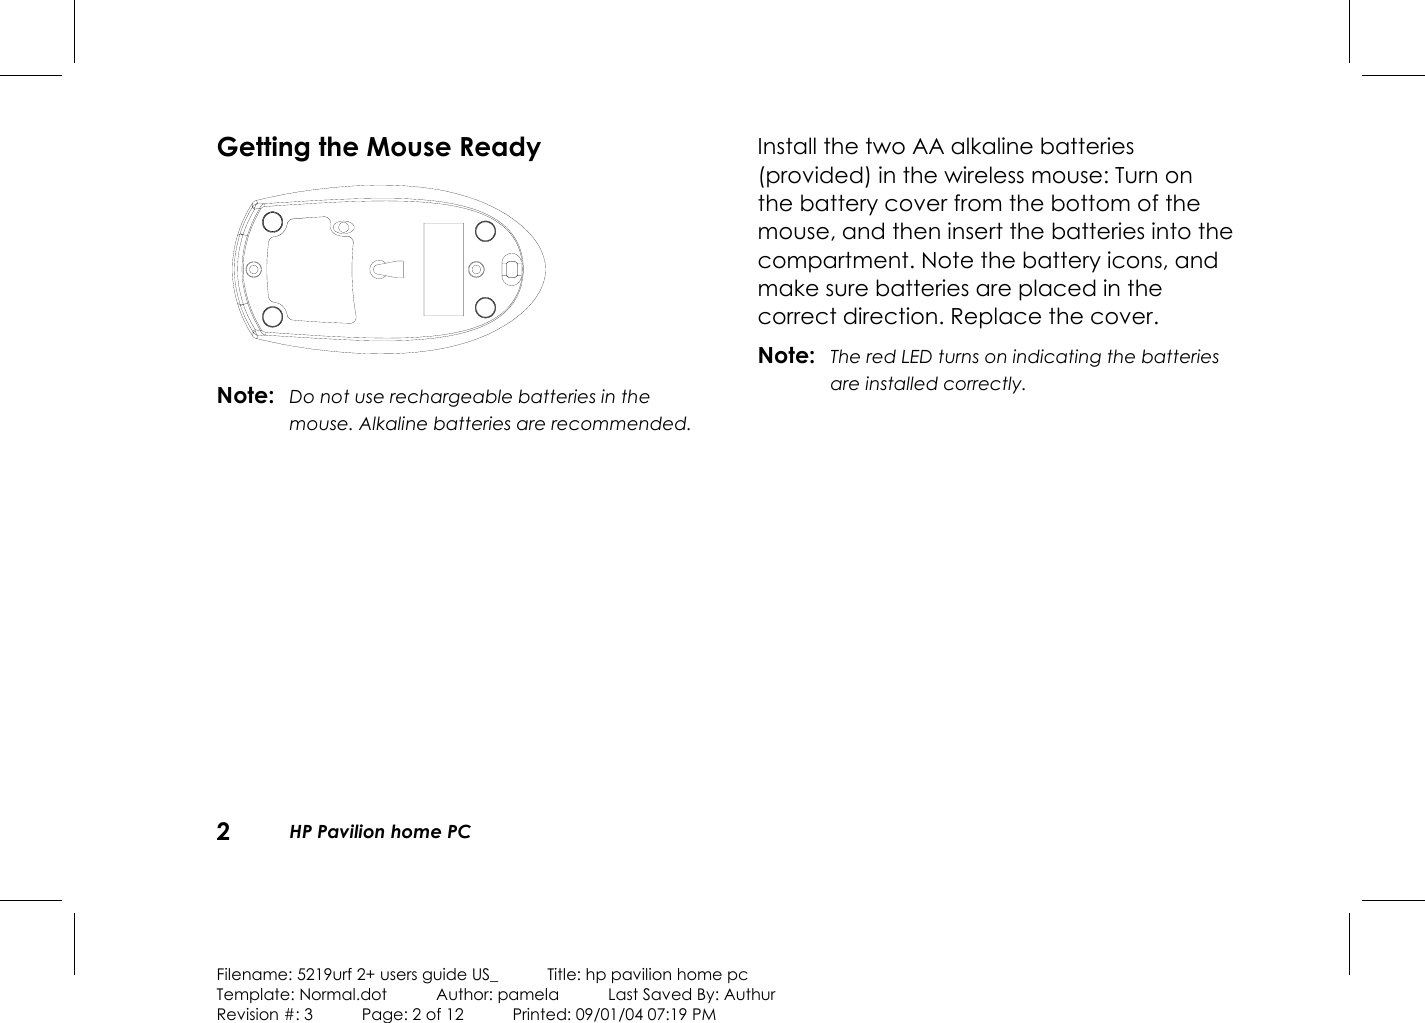 2  HP Pavilion home PC  Filename: 5219urf 2+ users guide US_            Title: hp pavilion home pc Template: Normal.dot      Author: pamela      Last Saved By: Authur Revision #: 3      Page: 2 of 12      Printed: 09/01/04 07:19 PM  Getting the Mouse Ready  Note:  Do not use rechargeable batteries in the mouse. Alkaline batteries are recommended.  Install the two AA alkaline batteries (provided) in the wireless mouse: Turn on the battery cover from the bottom of the mouse, and then insert the batteries into the compartment. Note the battery icons, and make sure batteries are placed in the correct direction. Replace the cover. Note:  The red LED turns on indicating the batteries are installed correctly.  